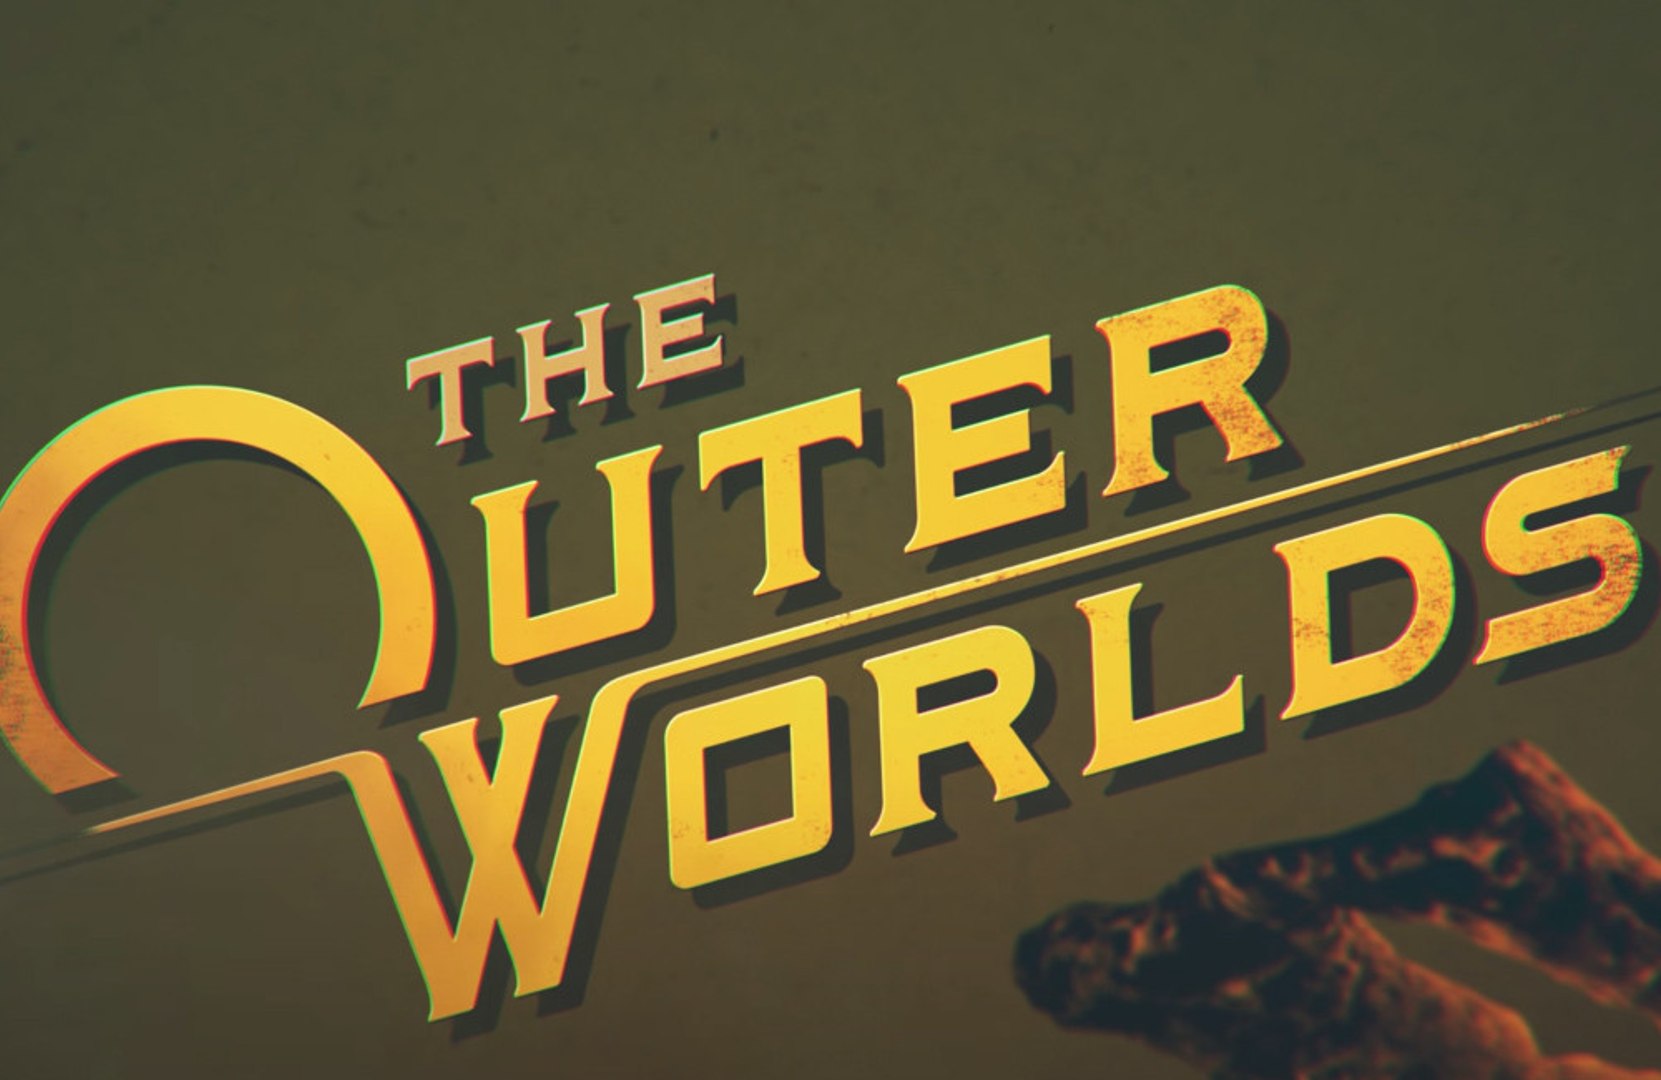 The Outer Worlds heads to Steam later this month